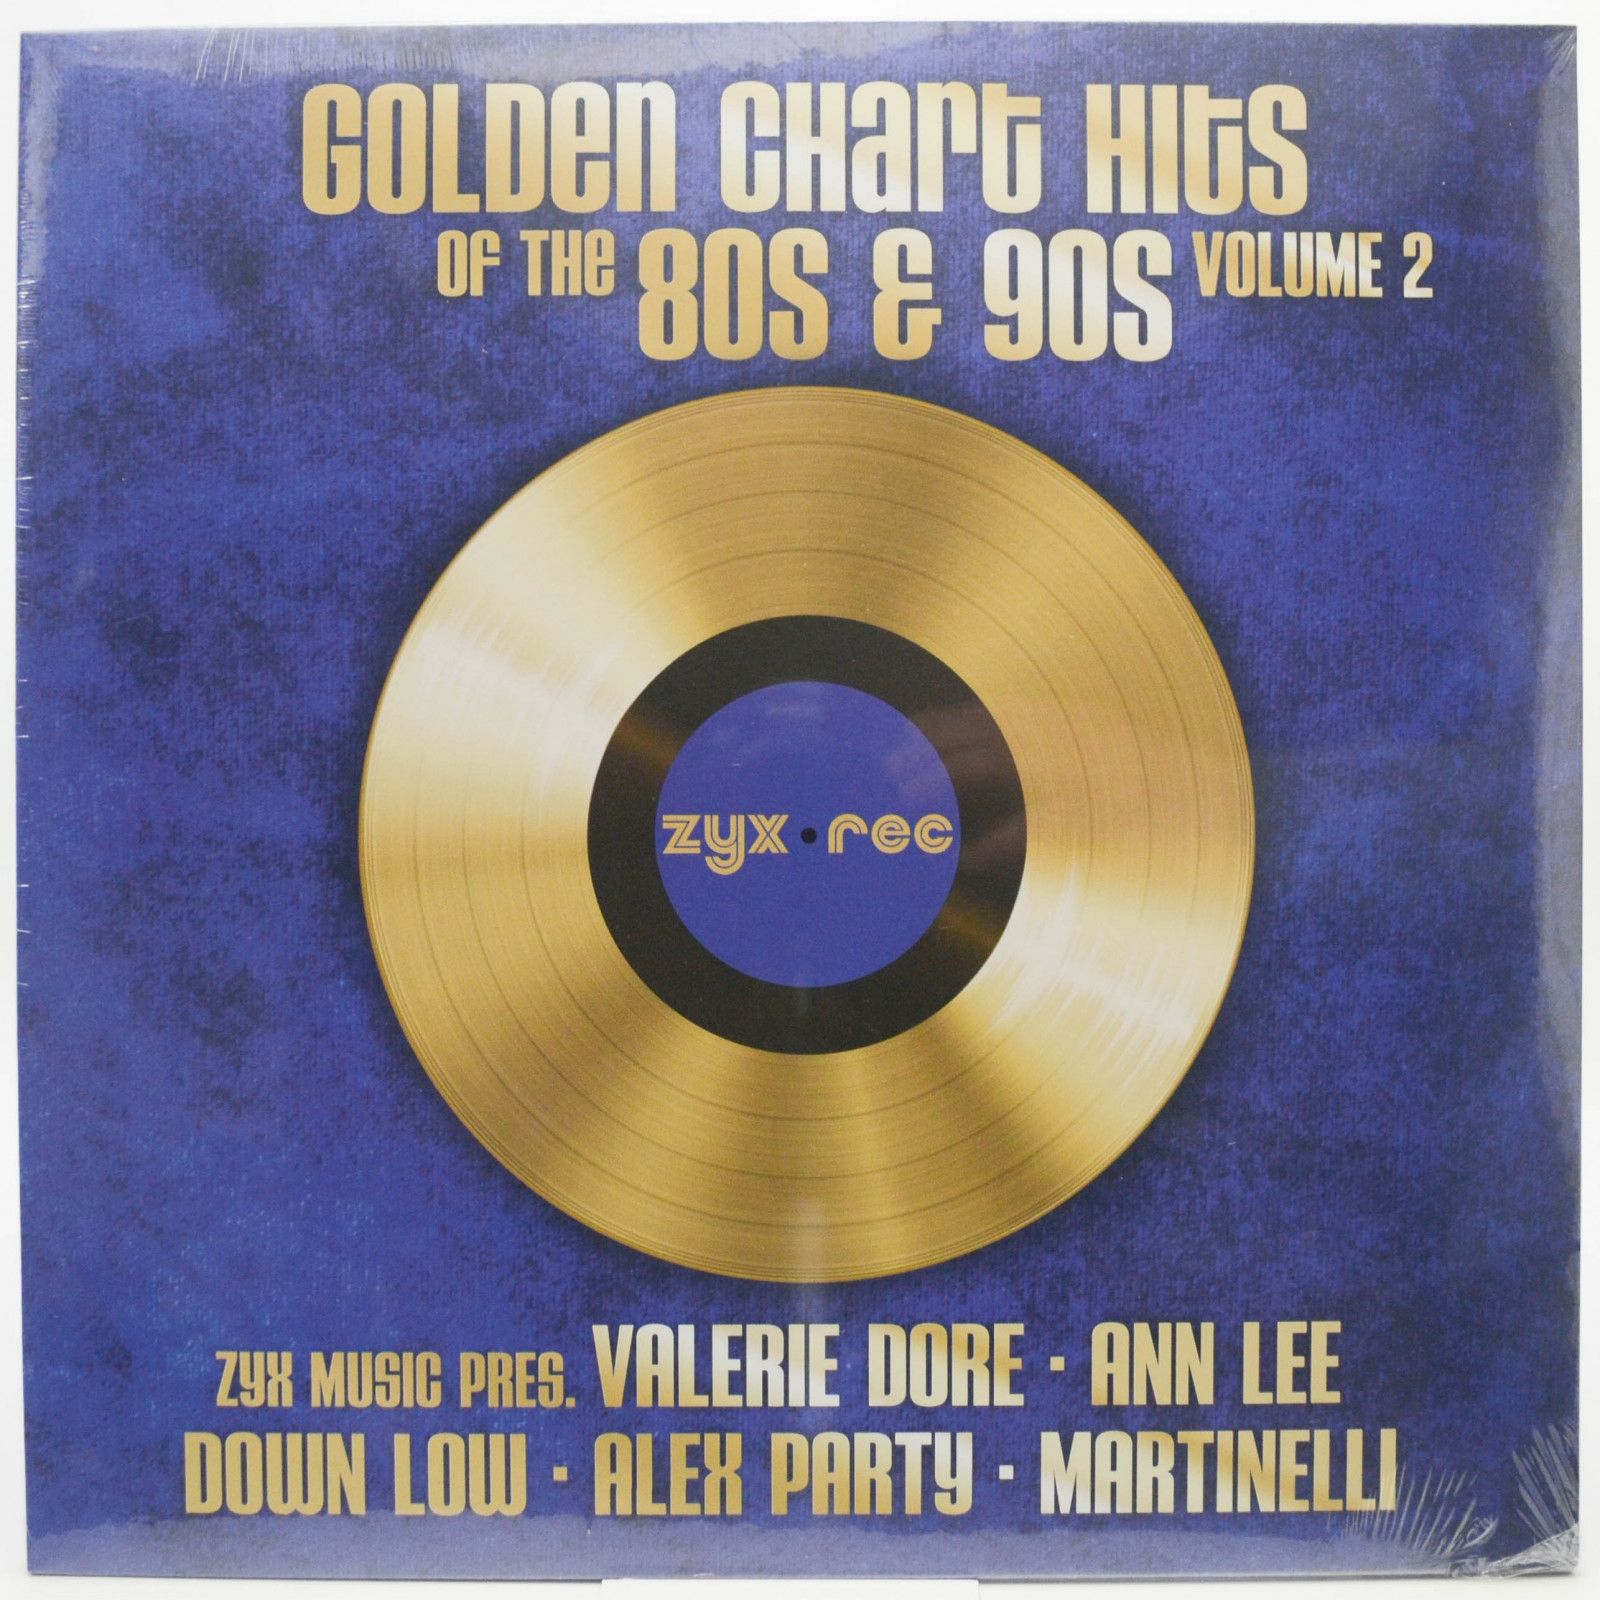 Various — Golden Chart Hits Of The 80s & 90s Volume 2, 2019